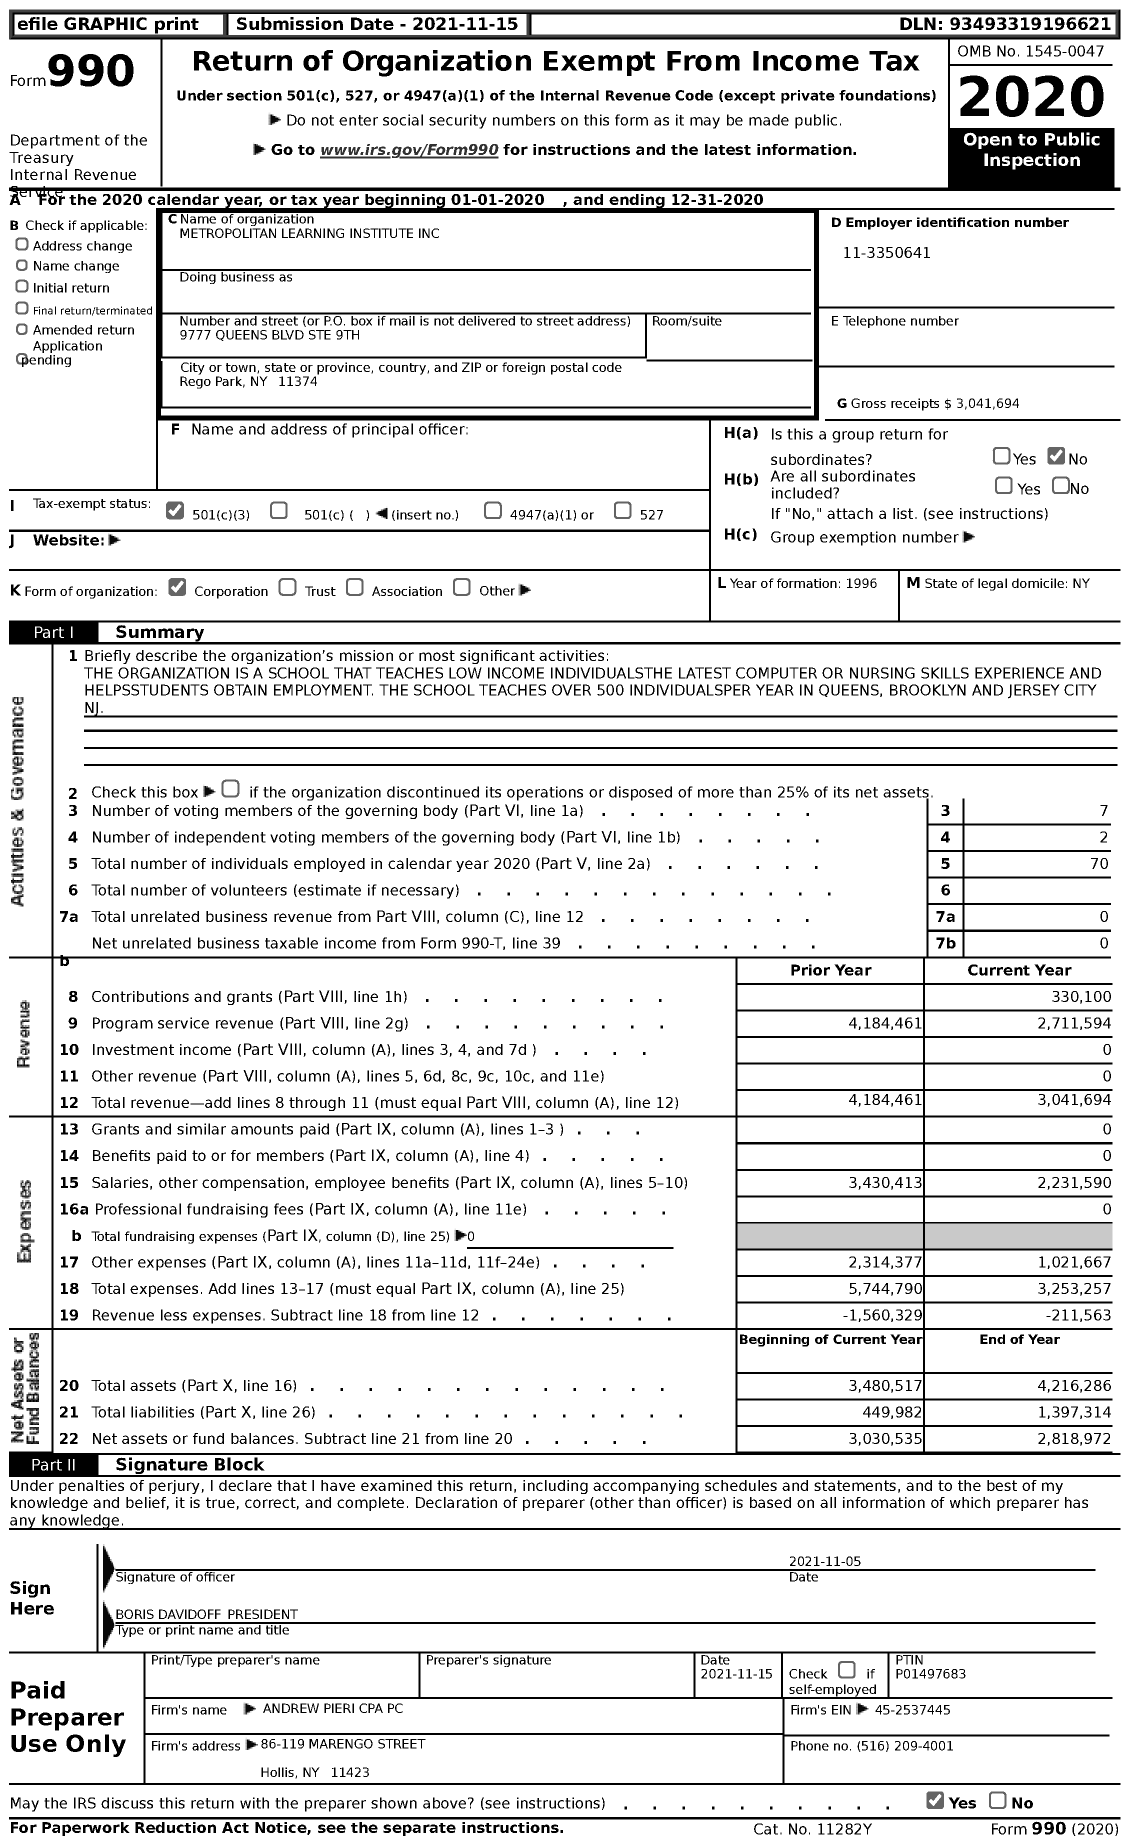 Image of first page of 2020 Form 990 for Metropolitan Learning Institute (MLI)